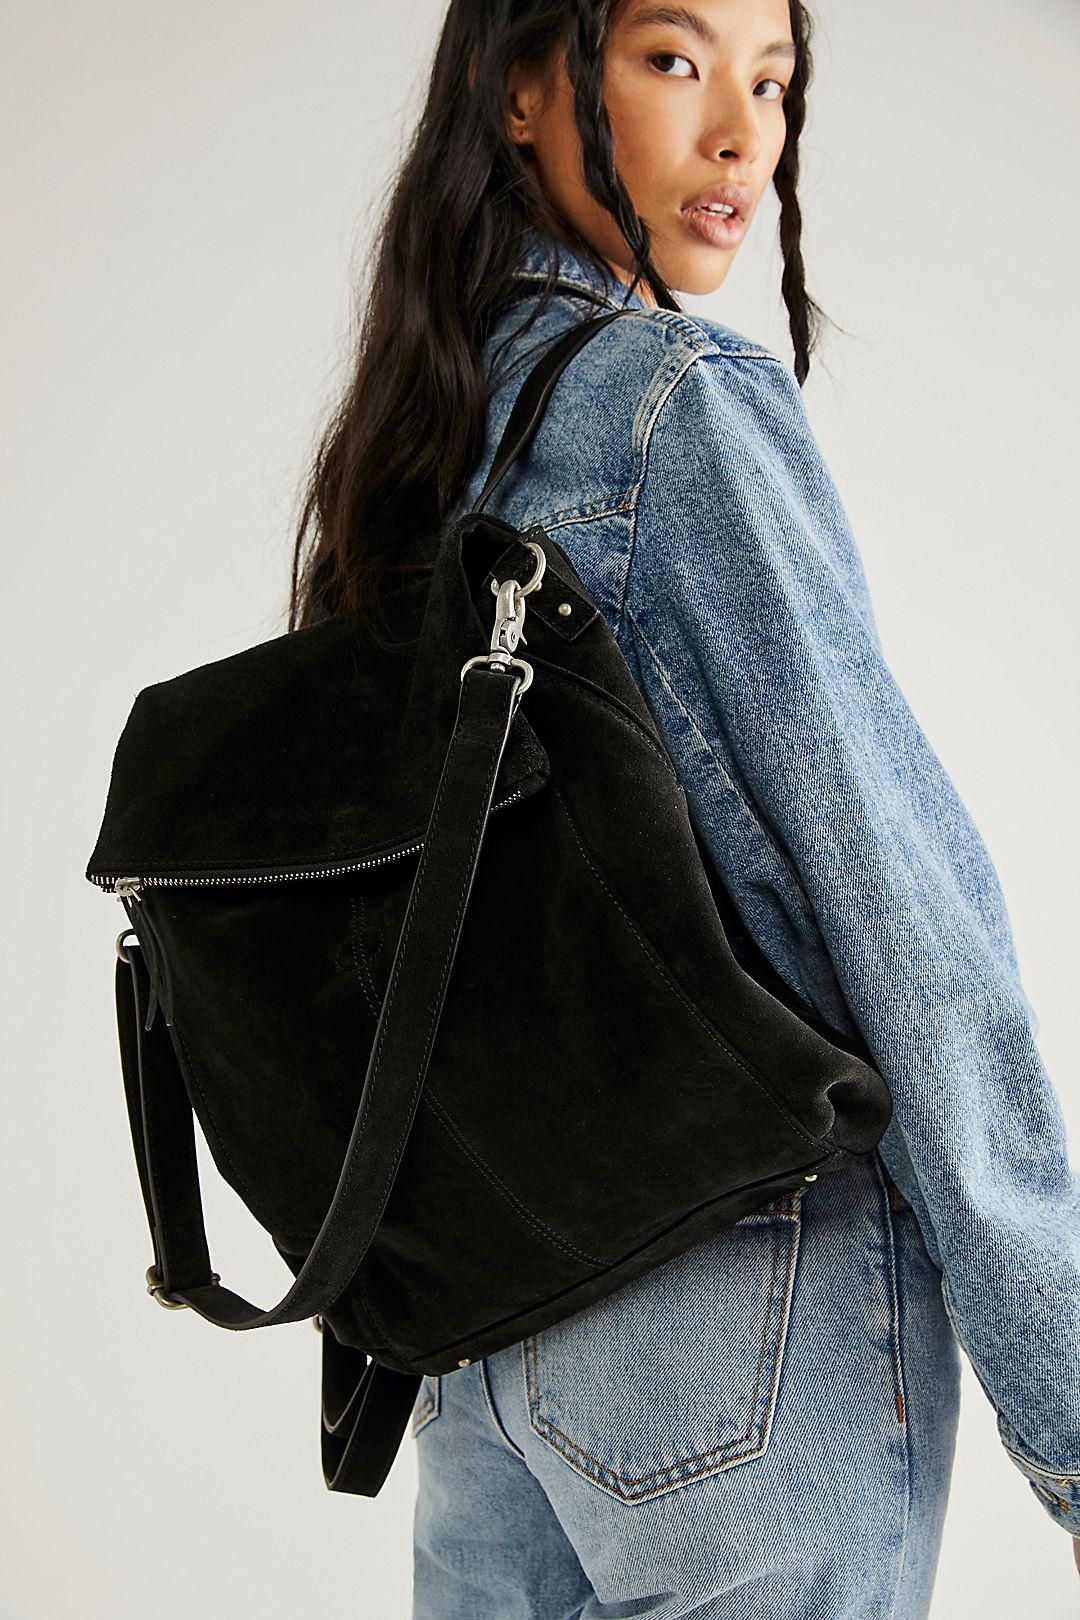 Free People Camilla Convertible Backpack